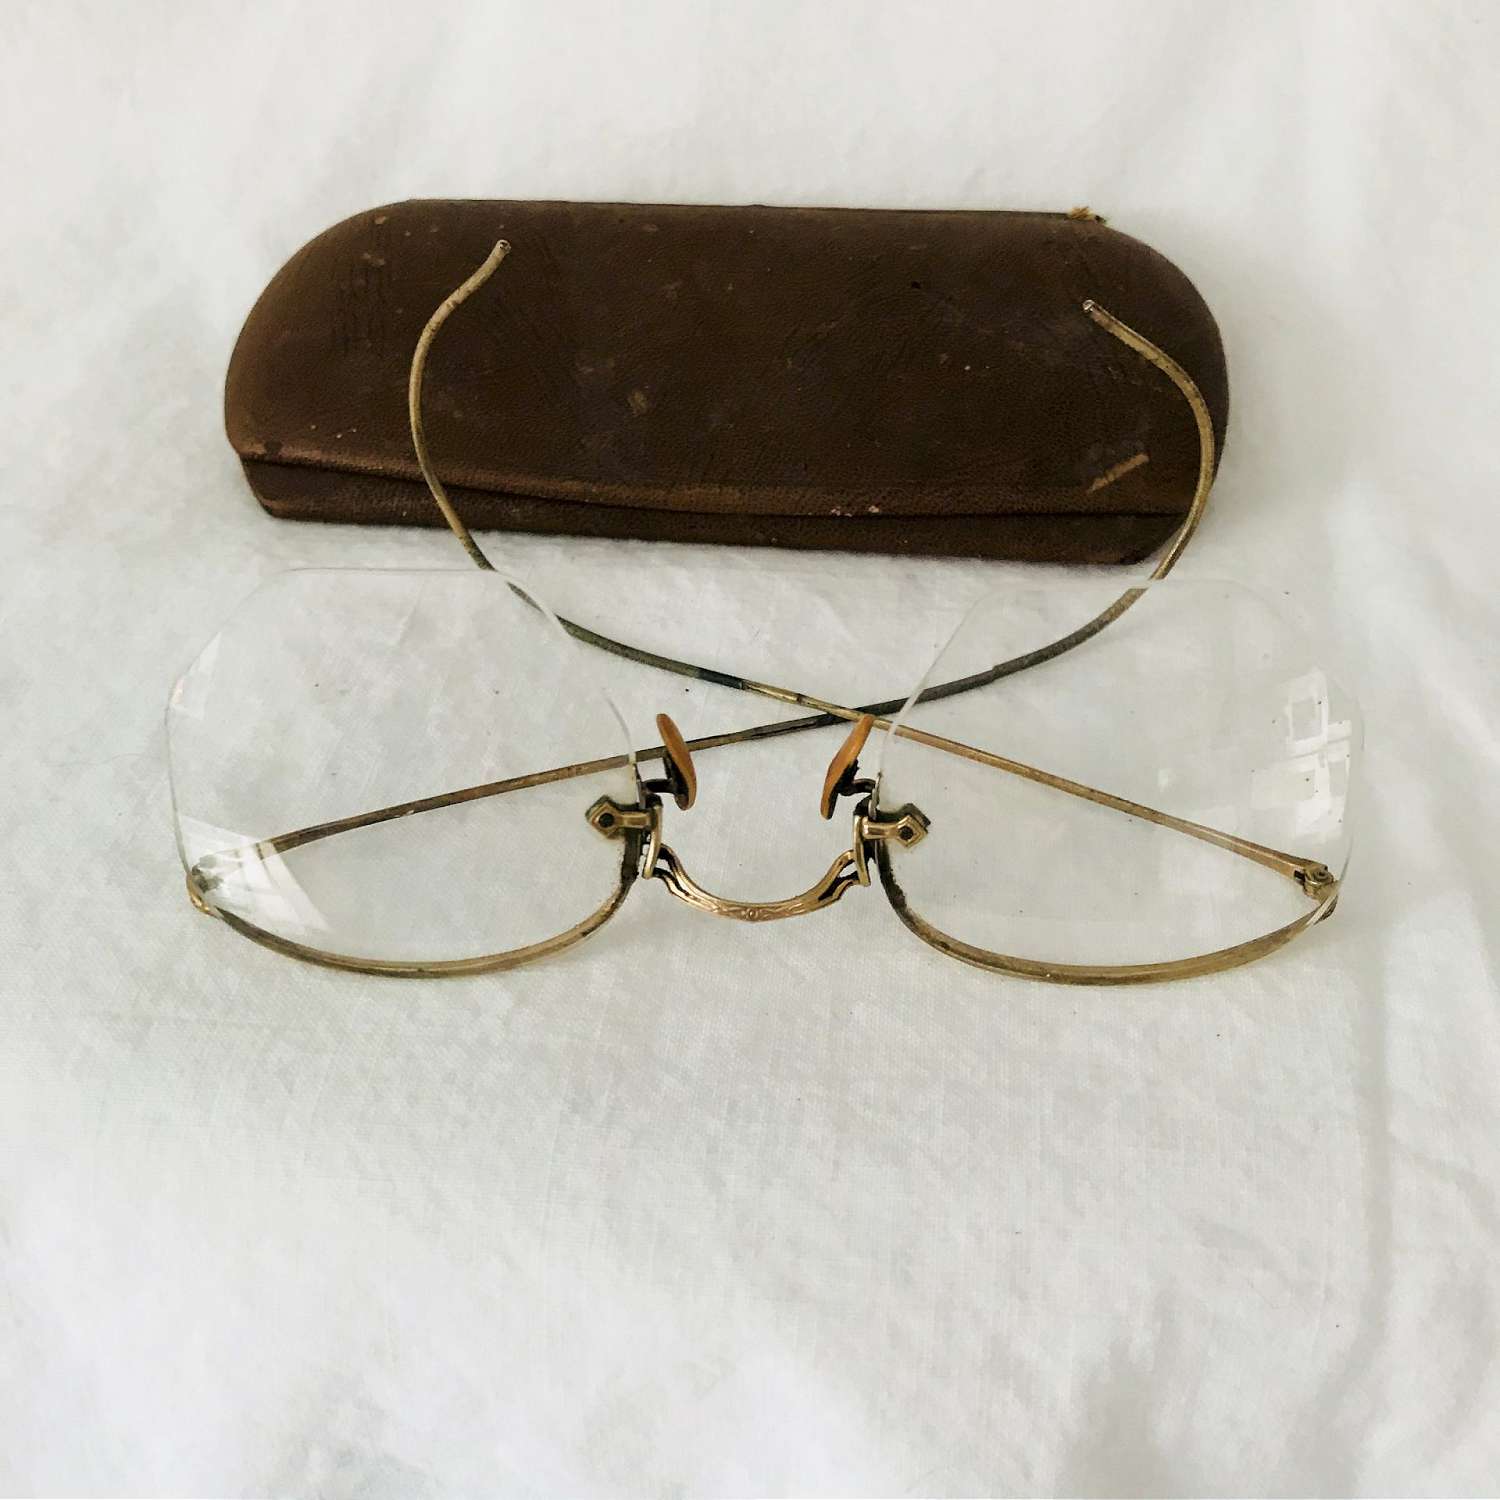 Antique eyeglasses gold wire rim 10-12K gold filled rims collectible ...